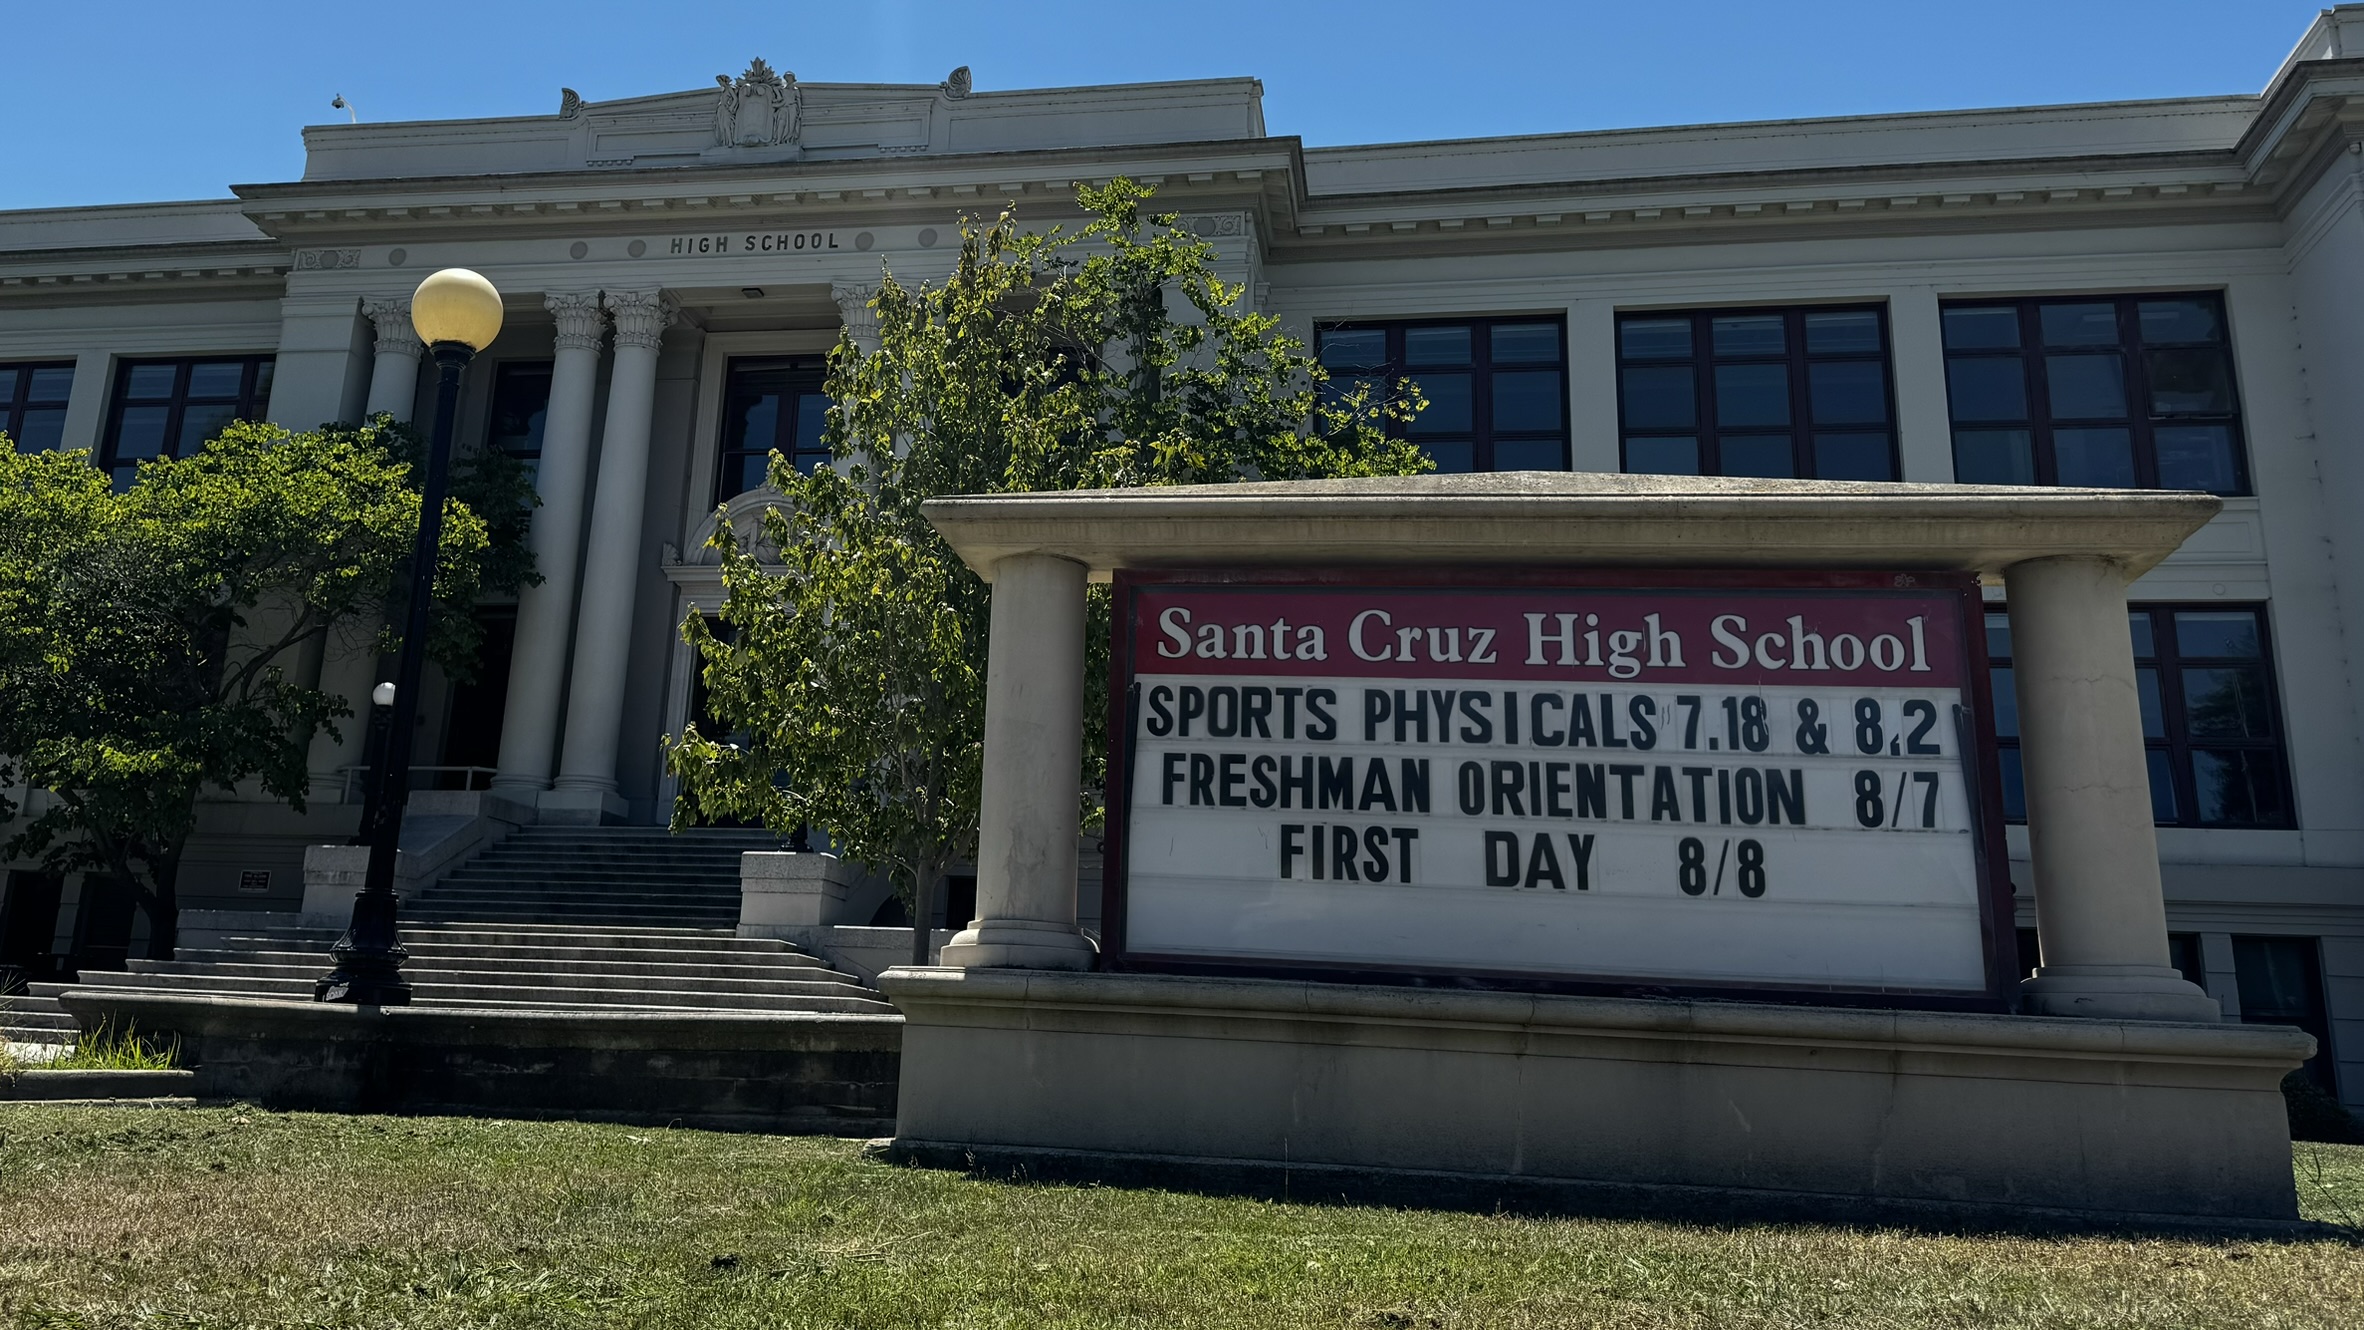 The front of Santa Cruz High has a sign that shows upcoming events including freshman orientation.